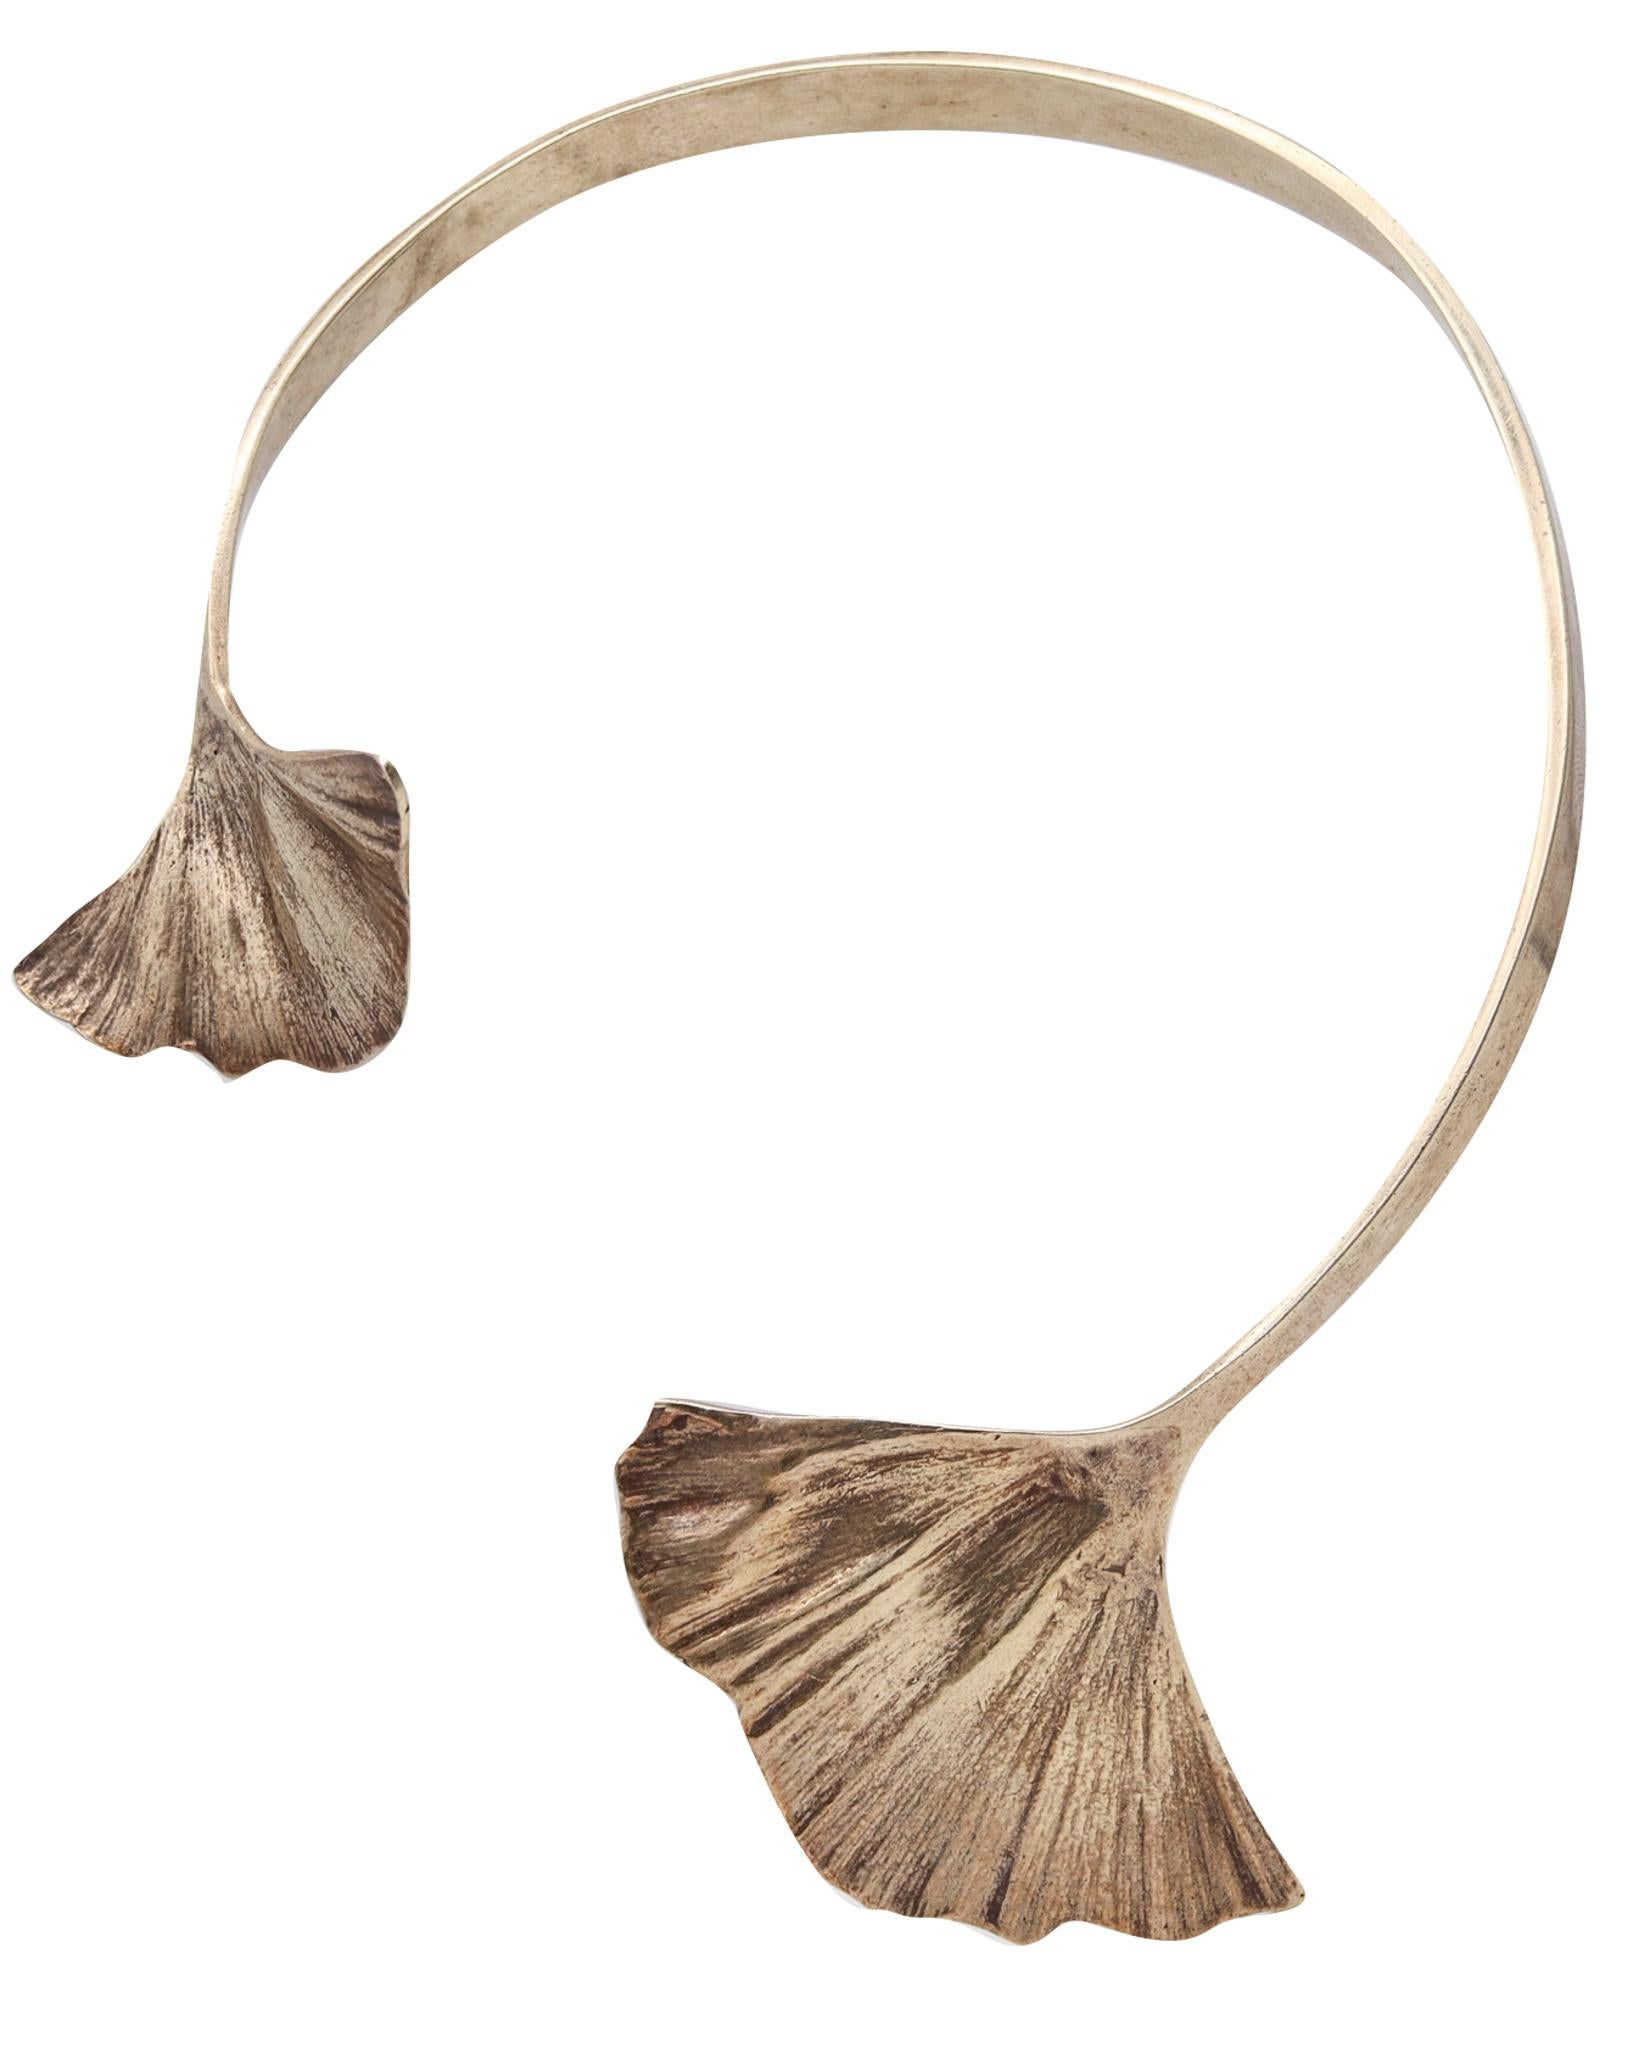 Paul Oudet 1970 Prototype Gingko Cuff Necklace in 18kt Gilt Vermeil over Silver